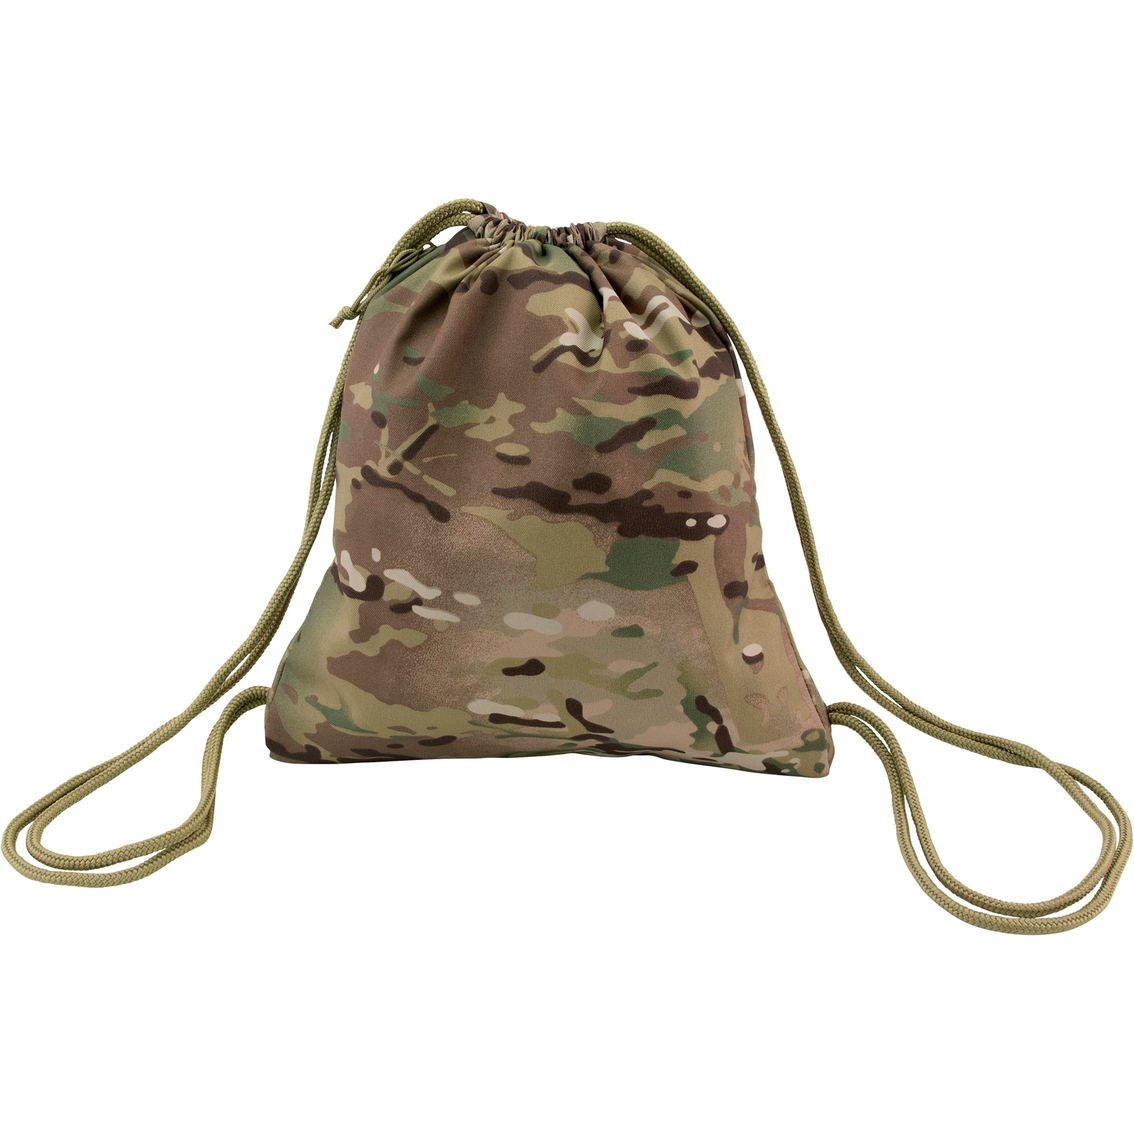 Mercury Tactical Gear Drawstring Backpack - Image 2 of 5